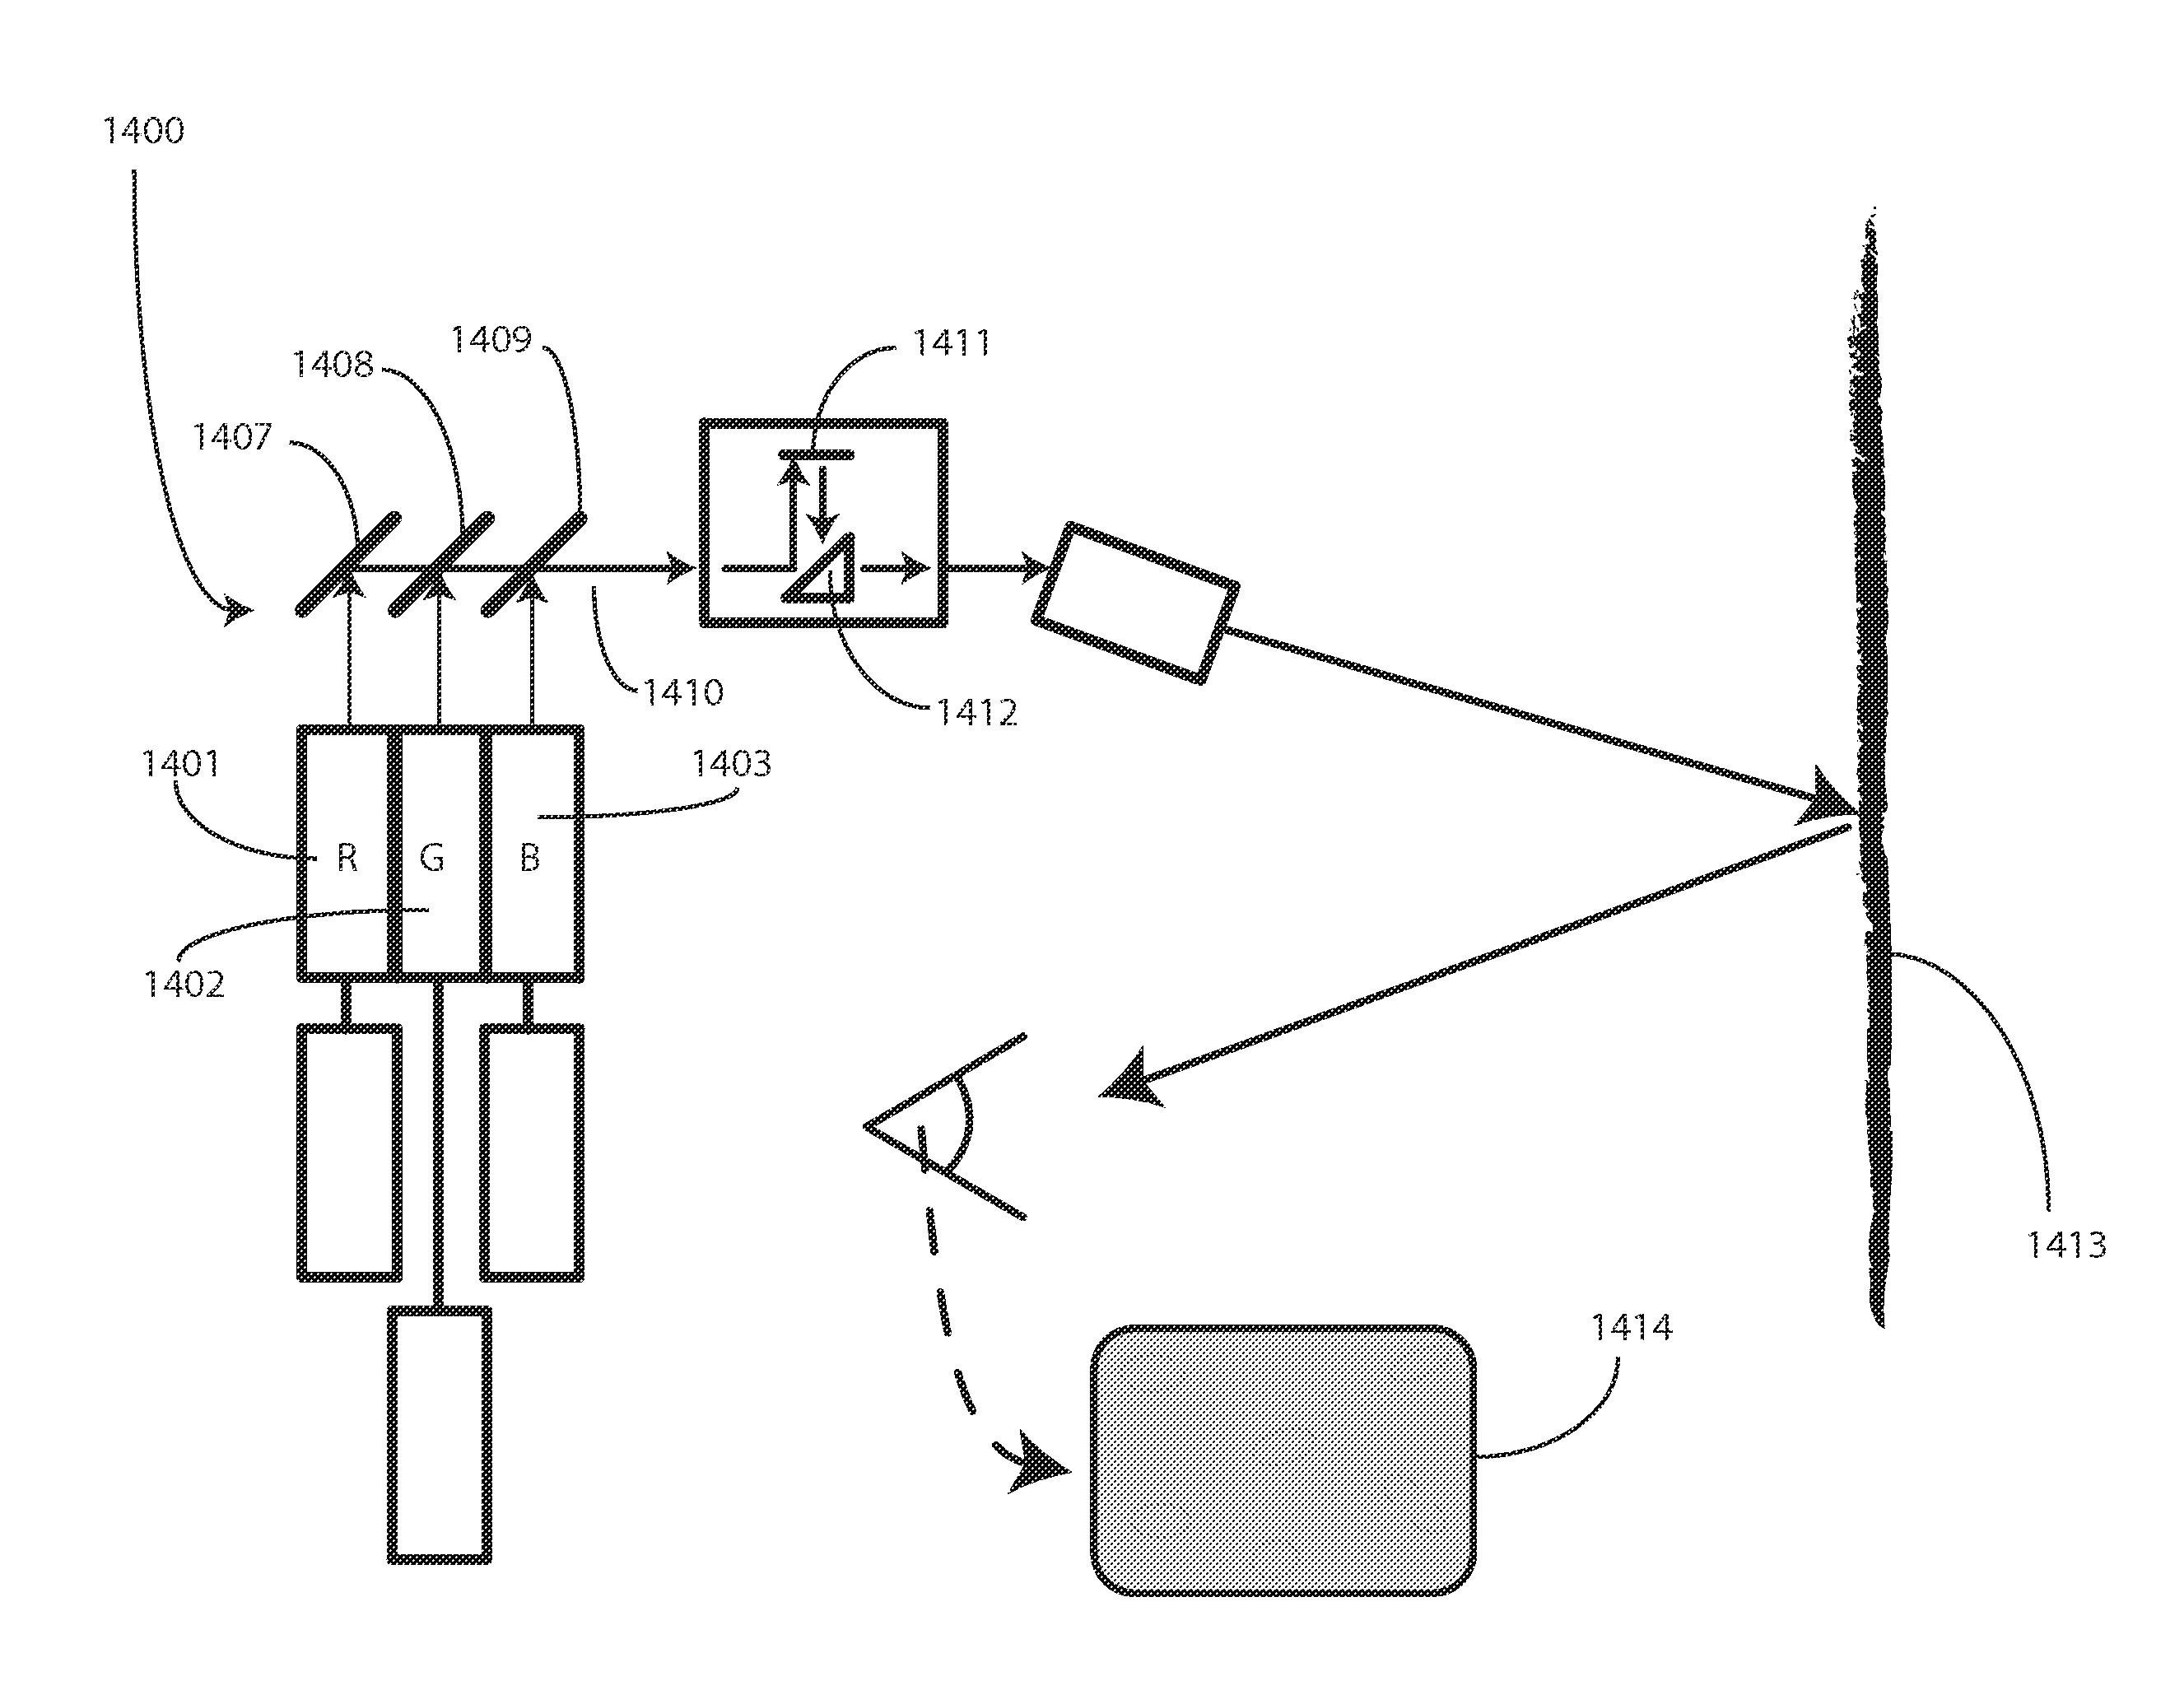 Projection System Using High-Frequency Drive Modulation to Reduce Perceived Speckle